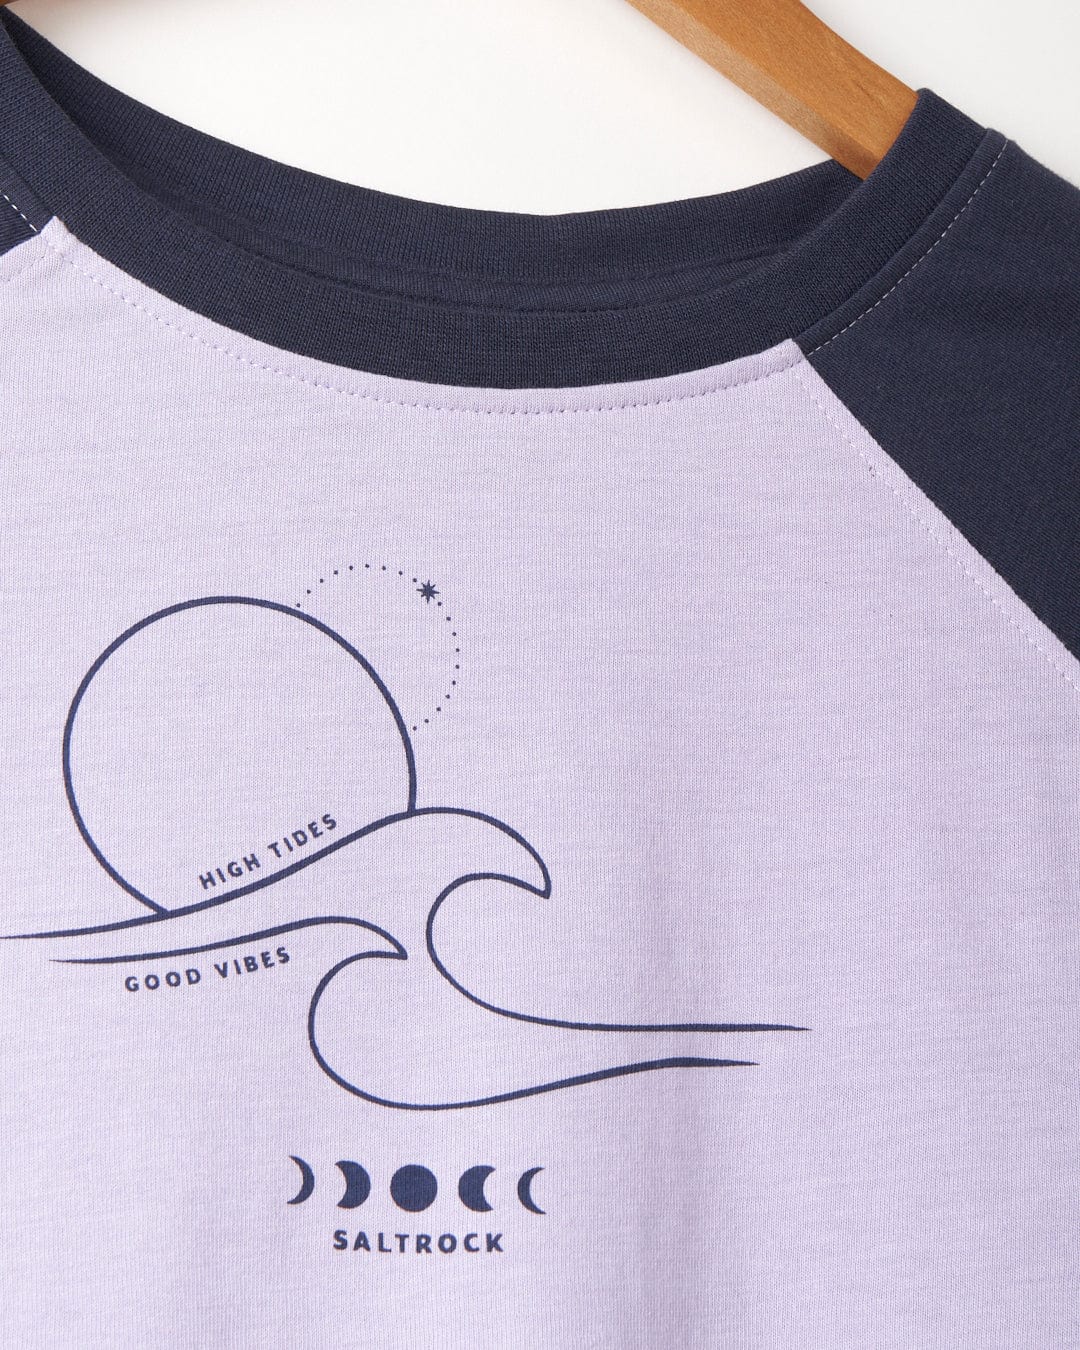 A Saltrock High Tides - Womens Raglan Long Sleeve T-Shirt - Light Purple featuring a moon and waves design, with a high tides graphic for a peached soft hand feel finish.